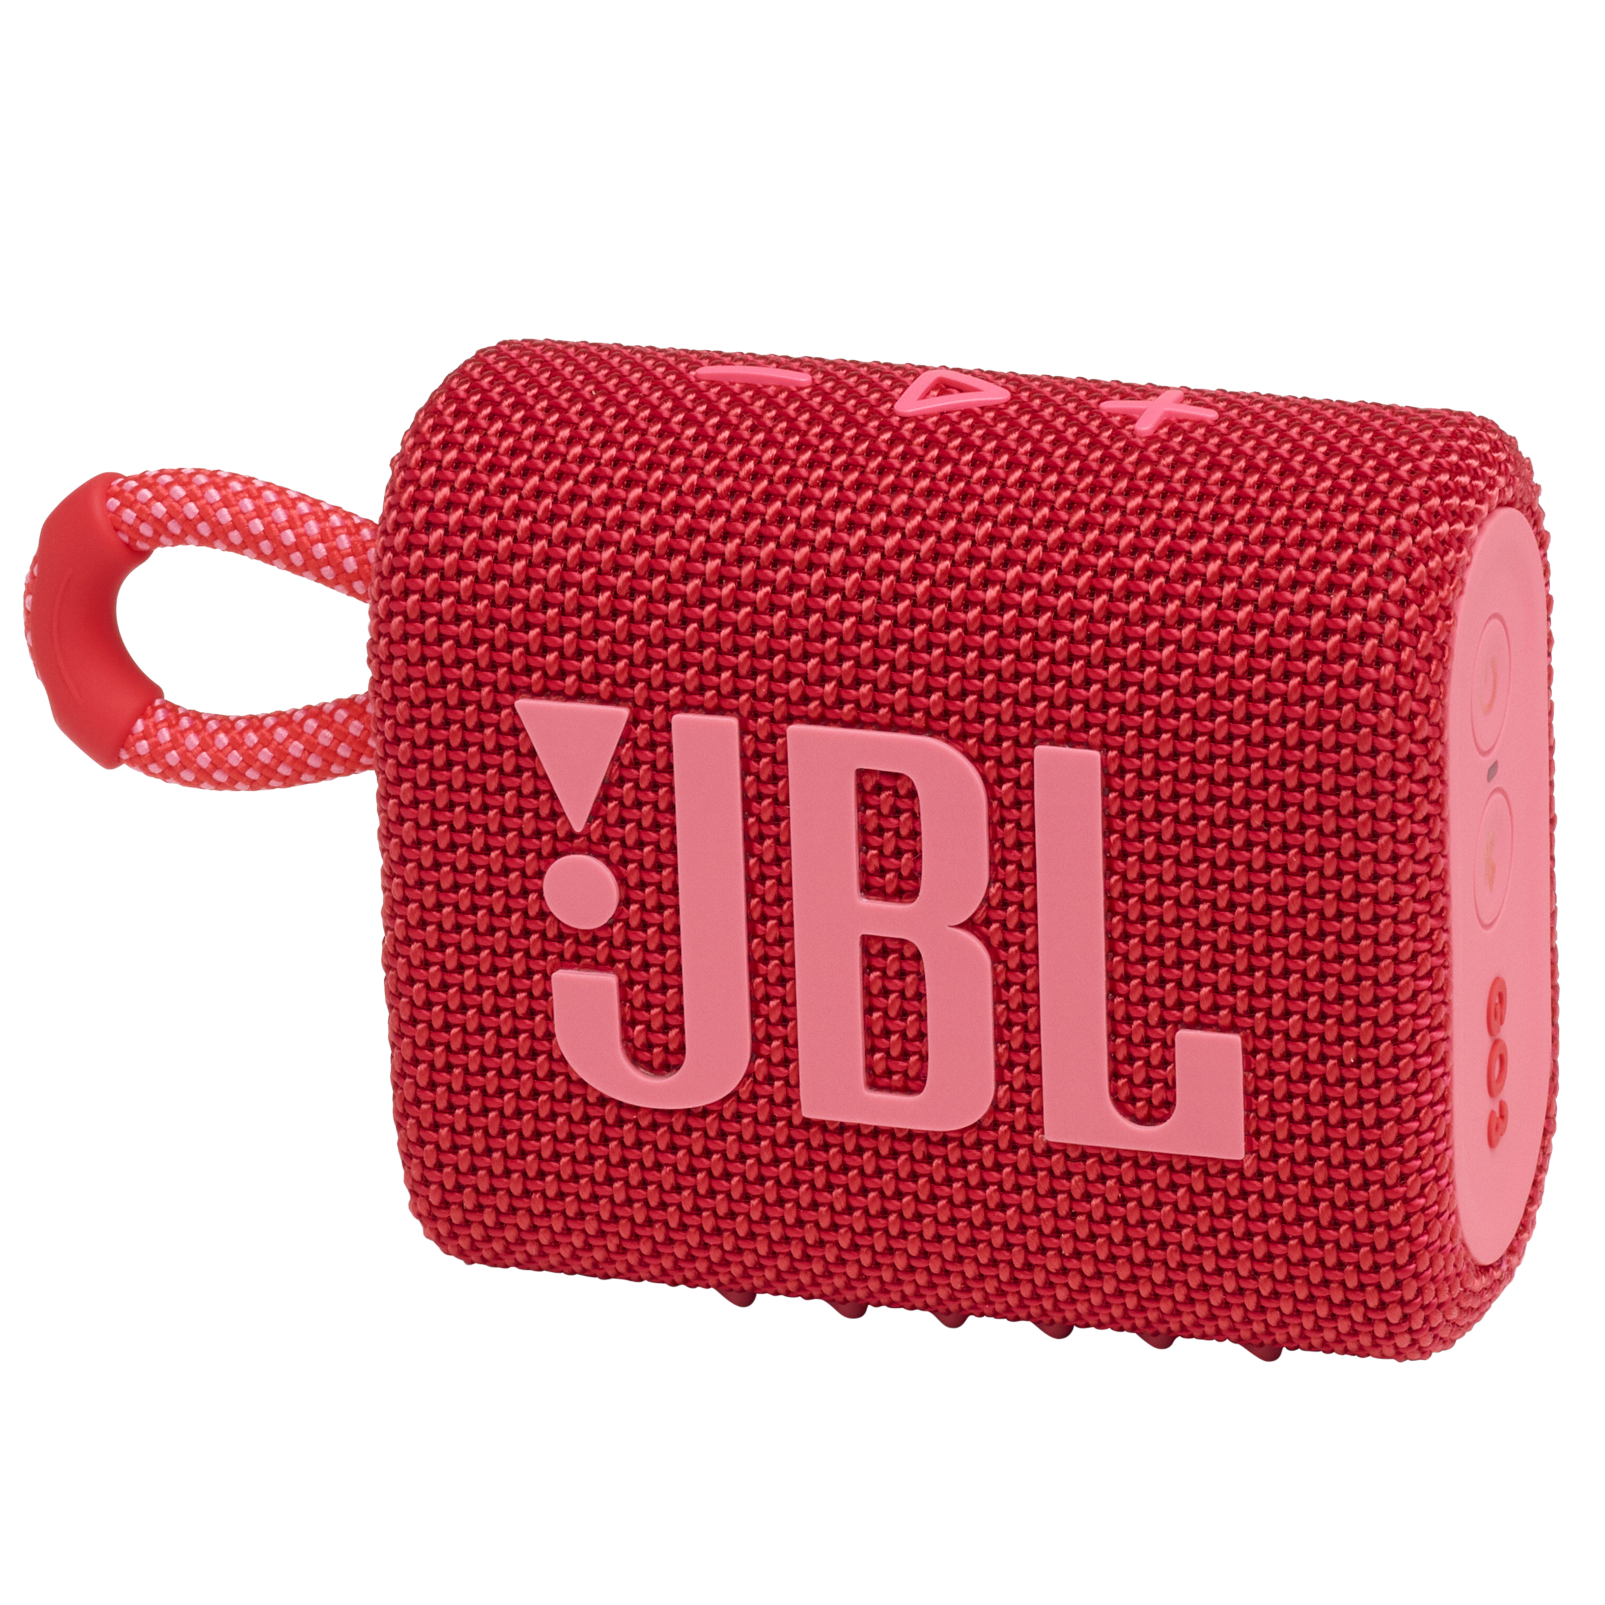 SALE／59%OFF】 JBL GO3 RED